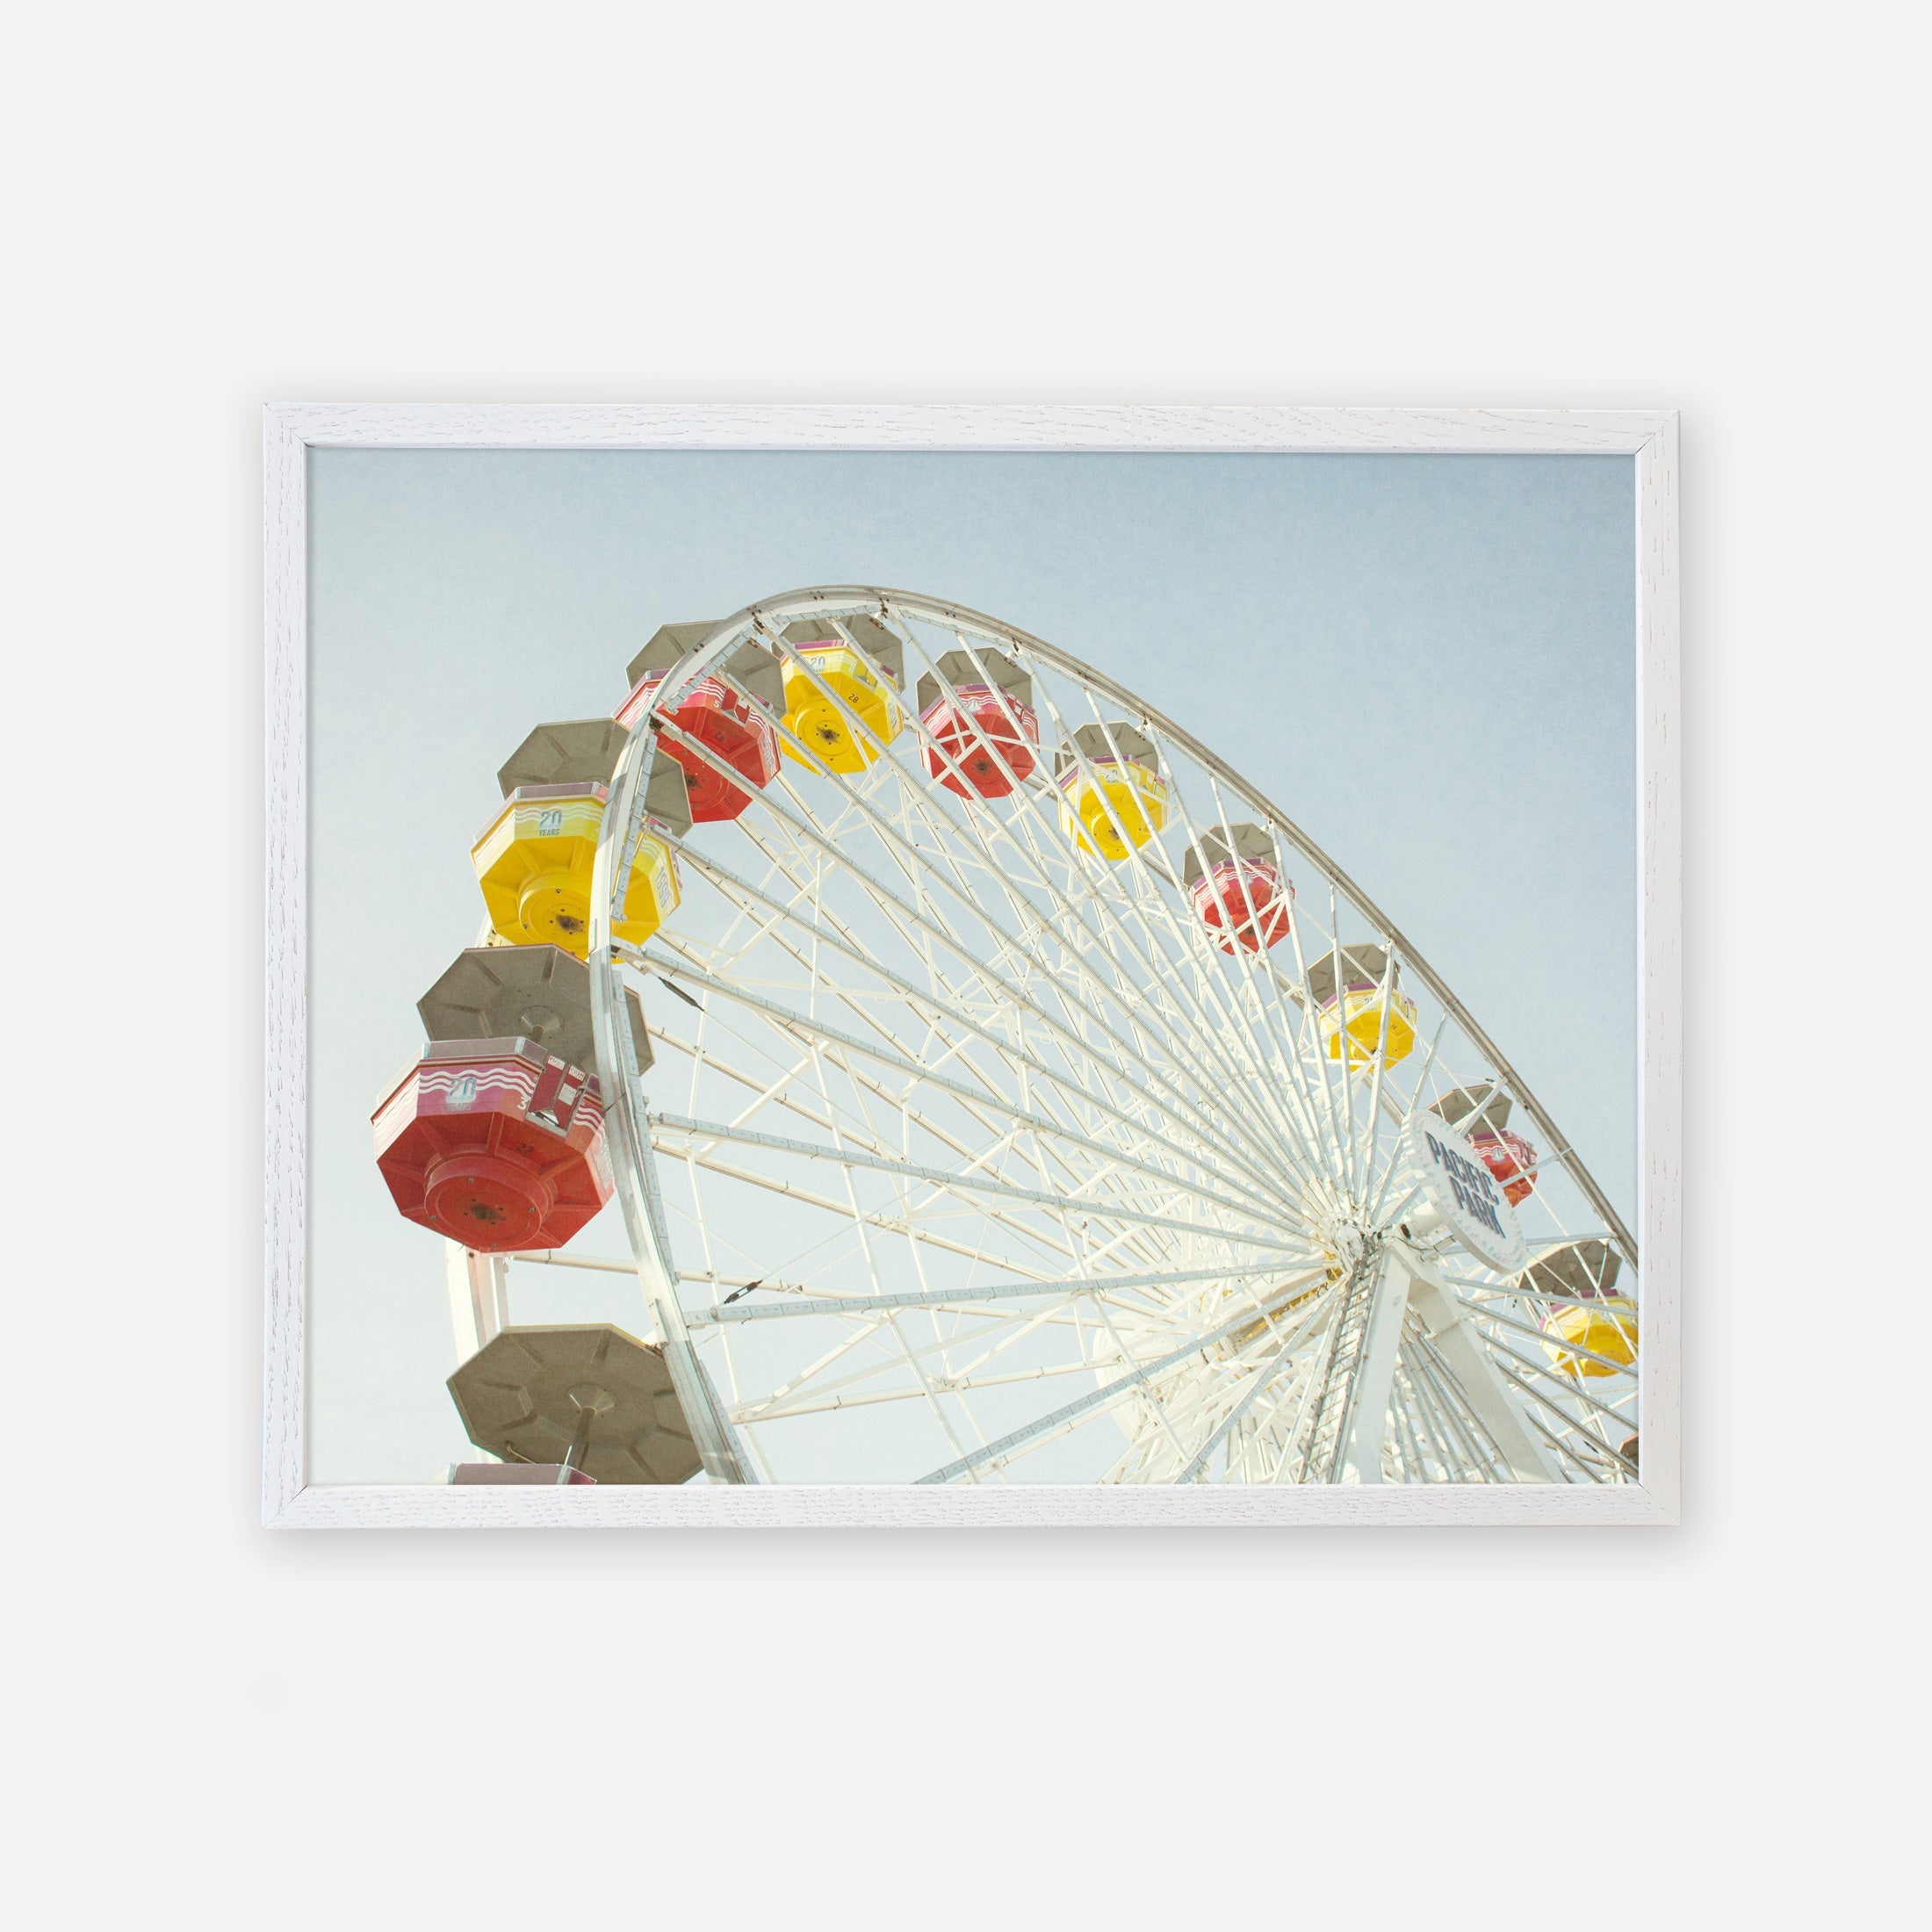 A colorful Santa Monica Ferris Wheel Print with red, yellow, and white cabins against a clear sky at Santa Monica Pier, framed as if it is a picture hanging on a wall.